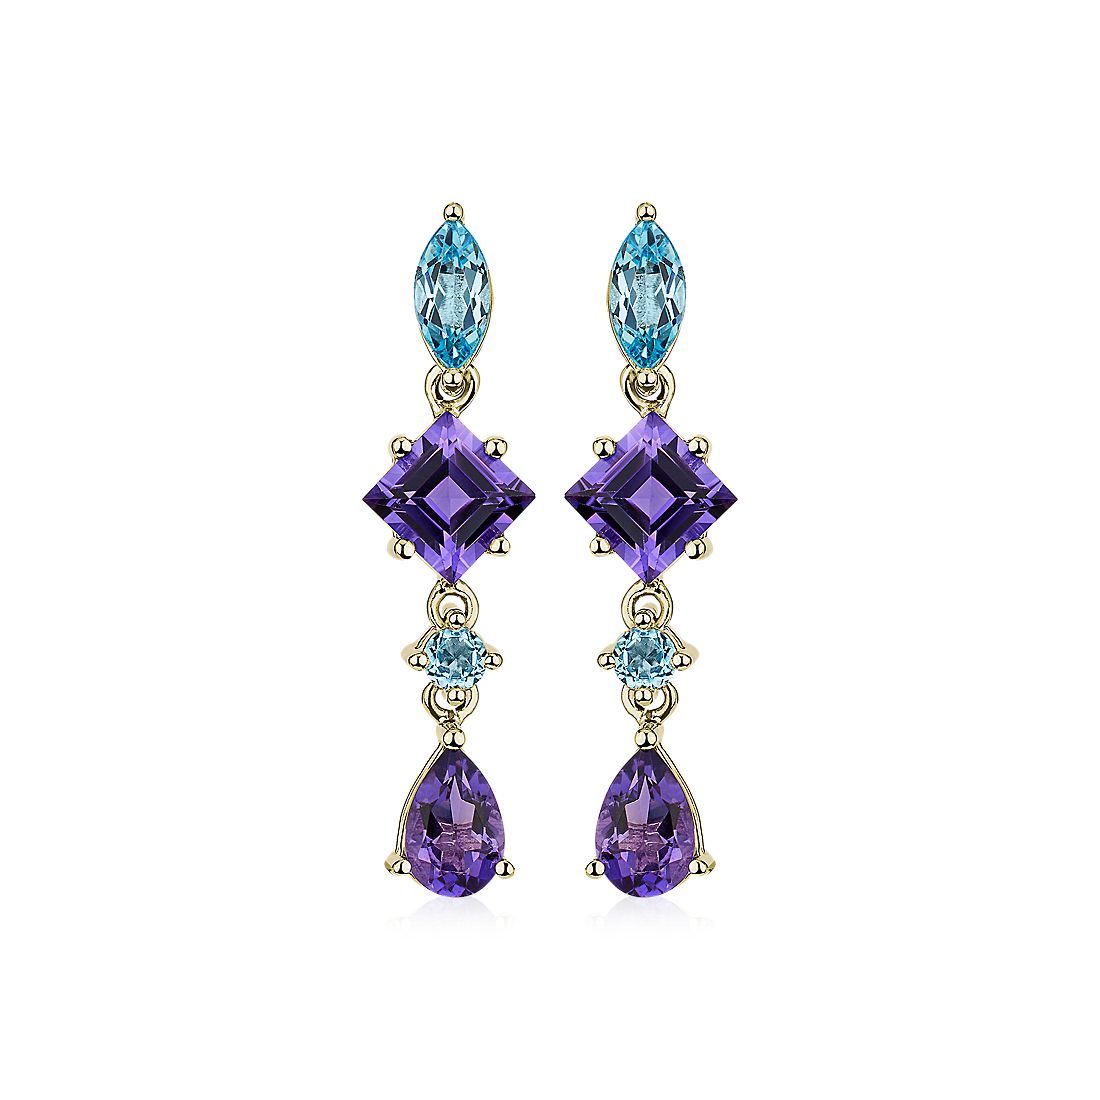 Blue Topaz and Amethyst Mixed Shape Drop Earrings in 14k Yellow Gold